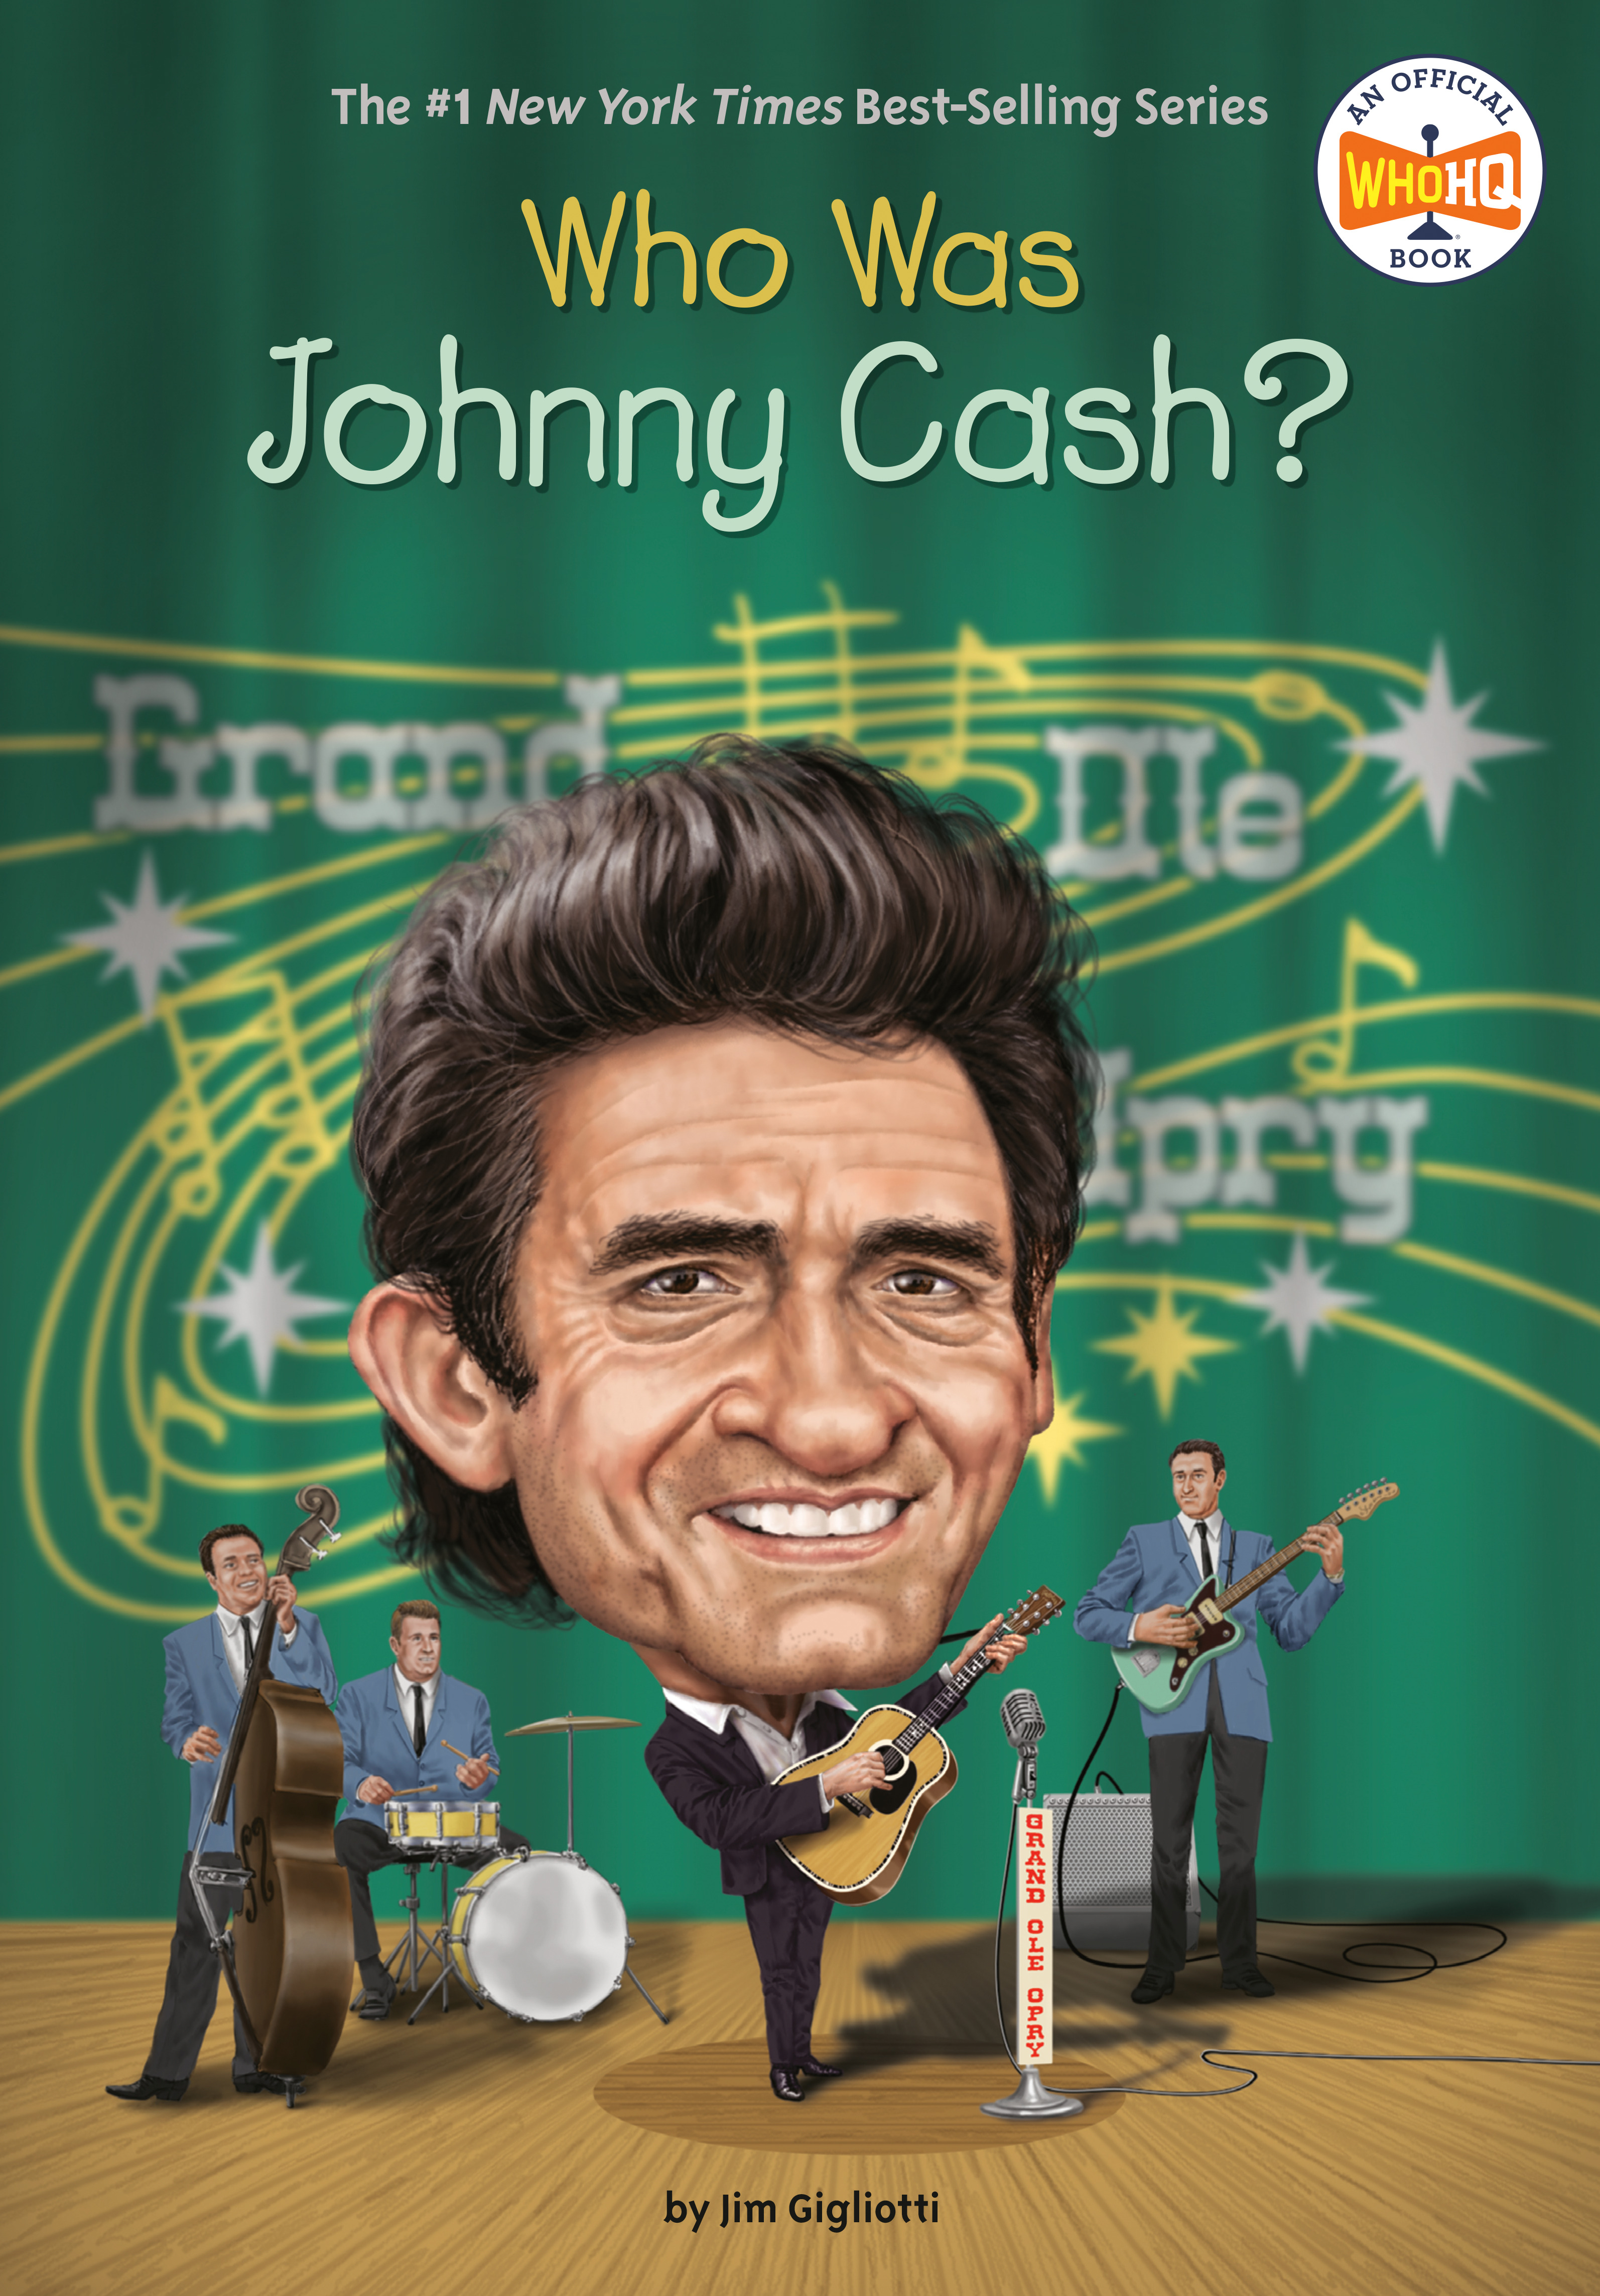 Who Was? - Who Was Johnny Cash? | Documentary